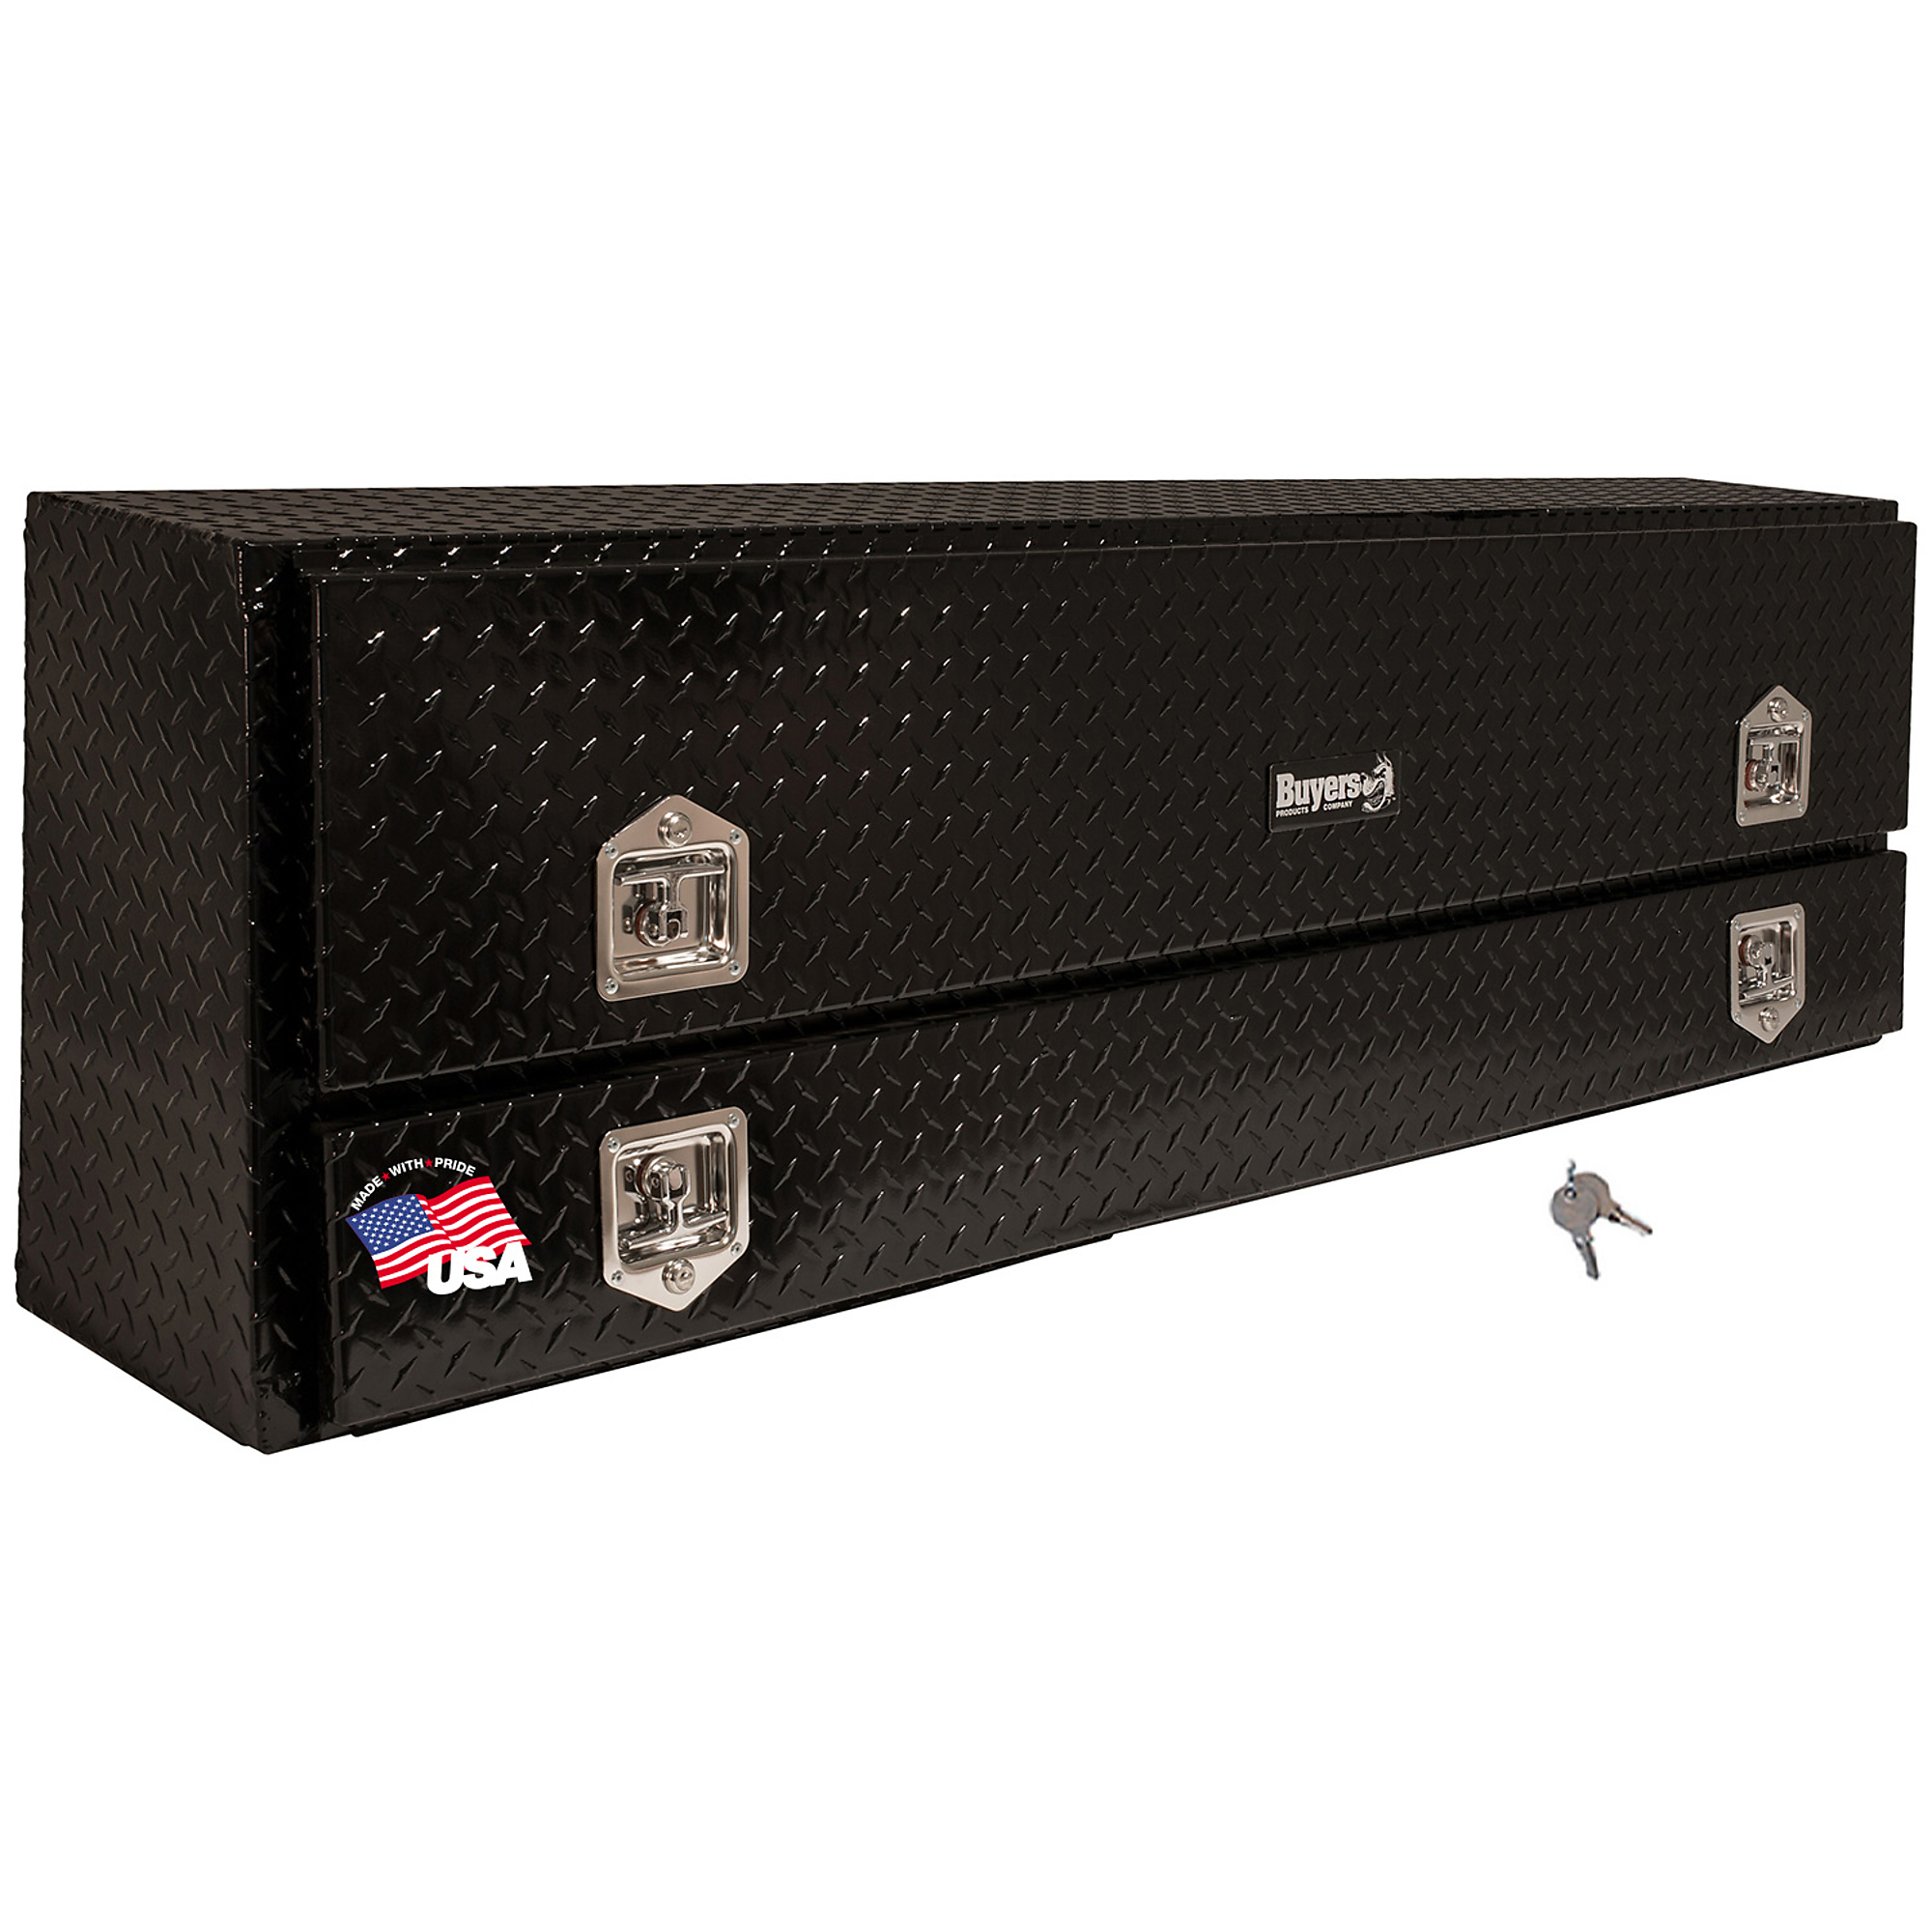 Buyers Products Contractor Truck Box, 72Inch Aluminum, Diamond Plate Glossy Black, Model 1725640